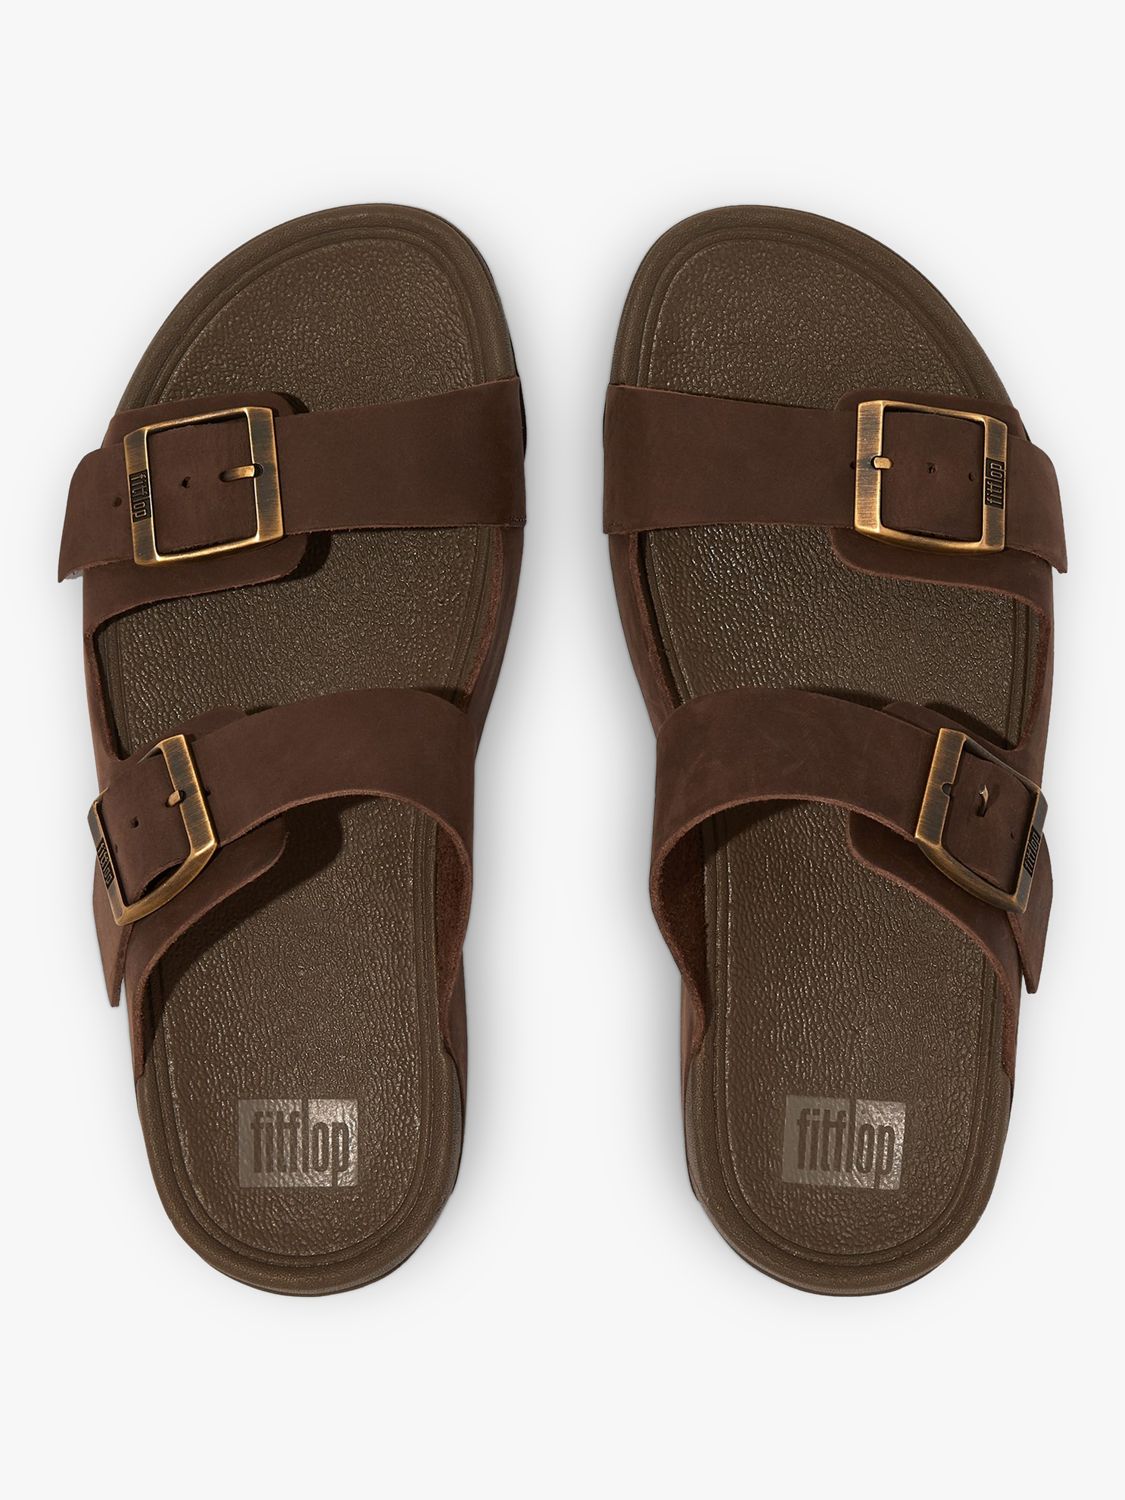 FitFlop Gogh Moc Leather Sliders, Chocolate at John Lewis & Partners